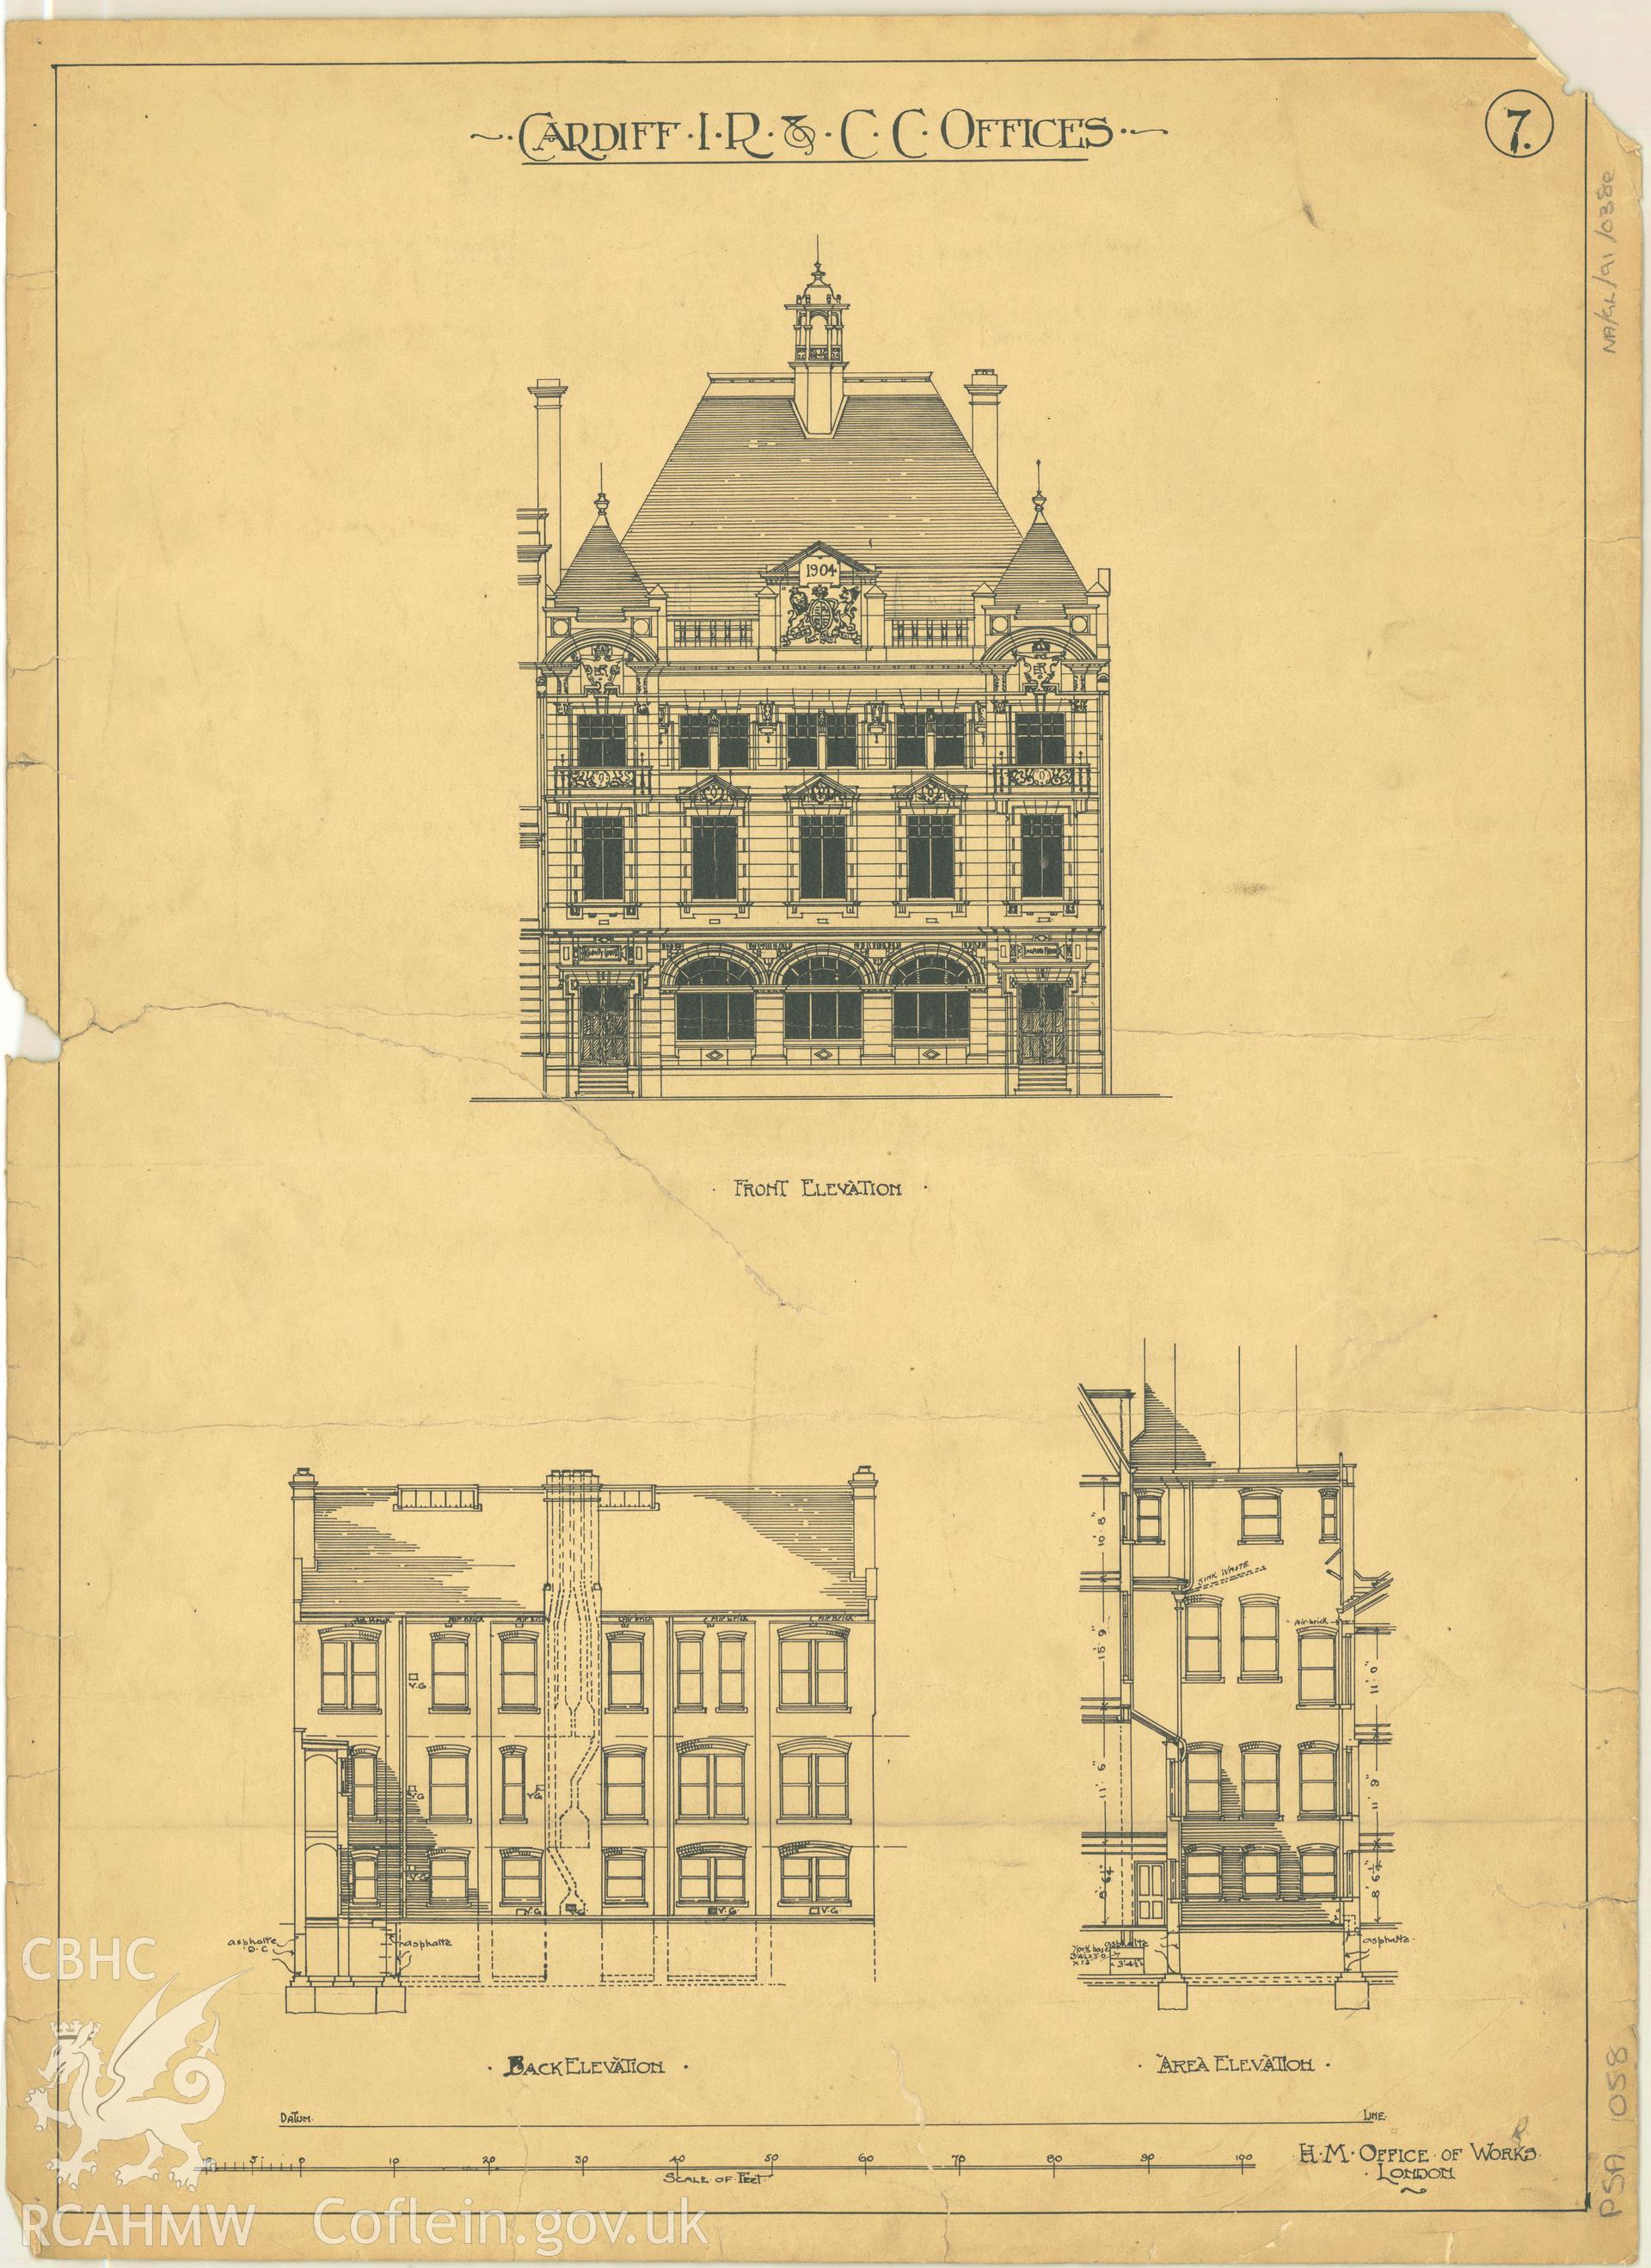 Cardiff Inland Revenue and County Court Offices; measured drawing showing elevation views, produced by H.M. Office of Works,  undated.